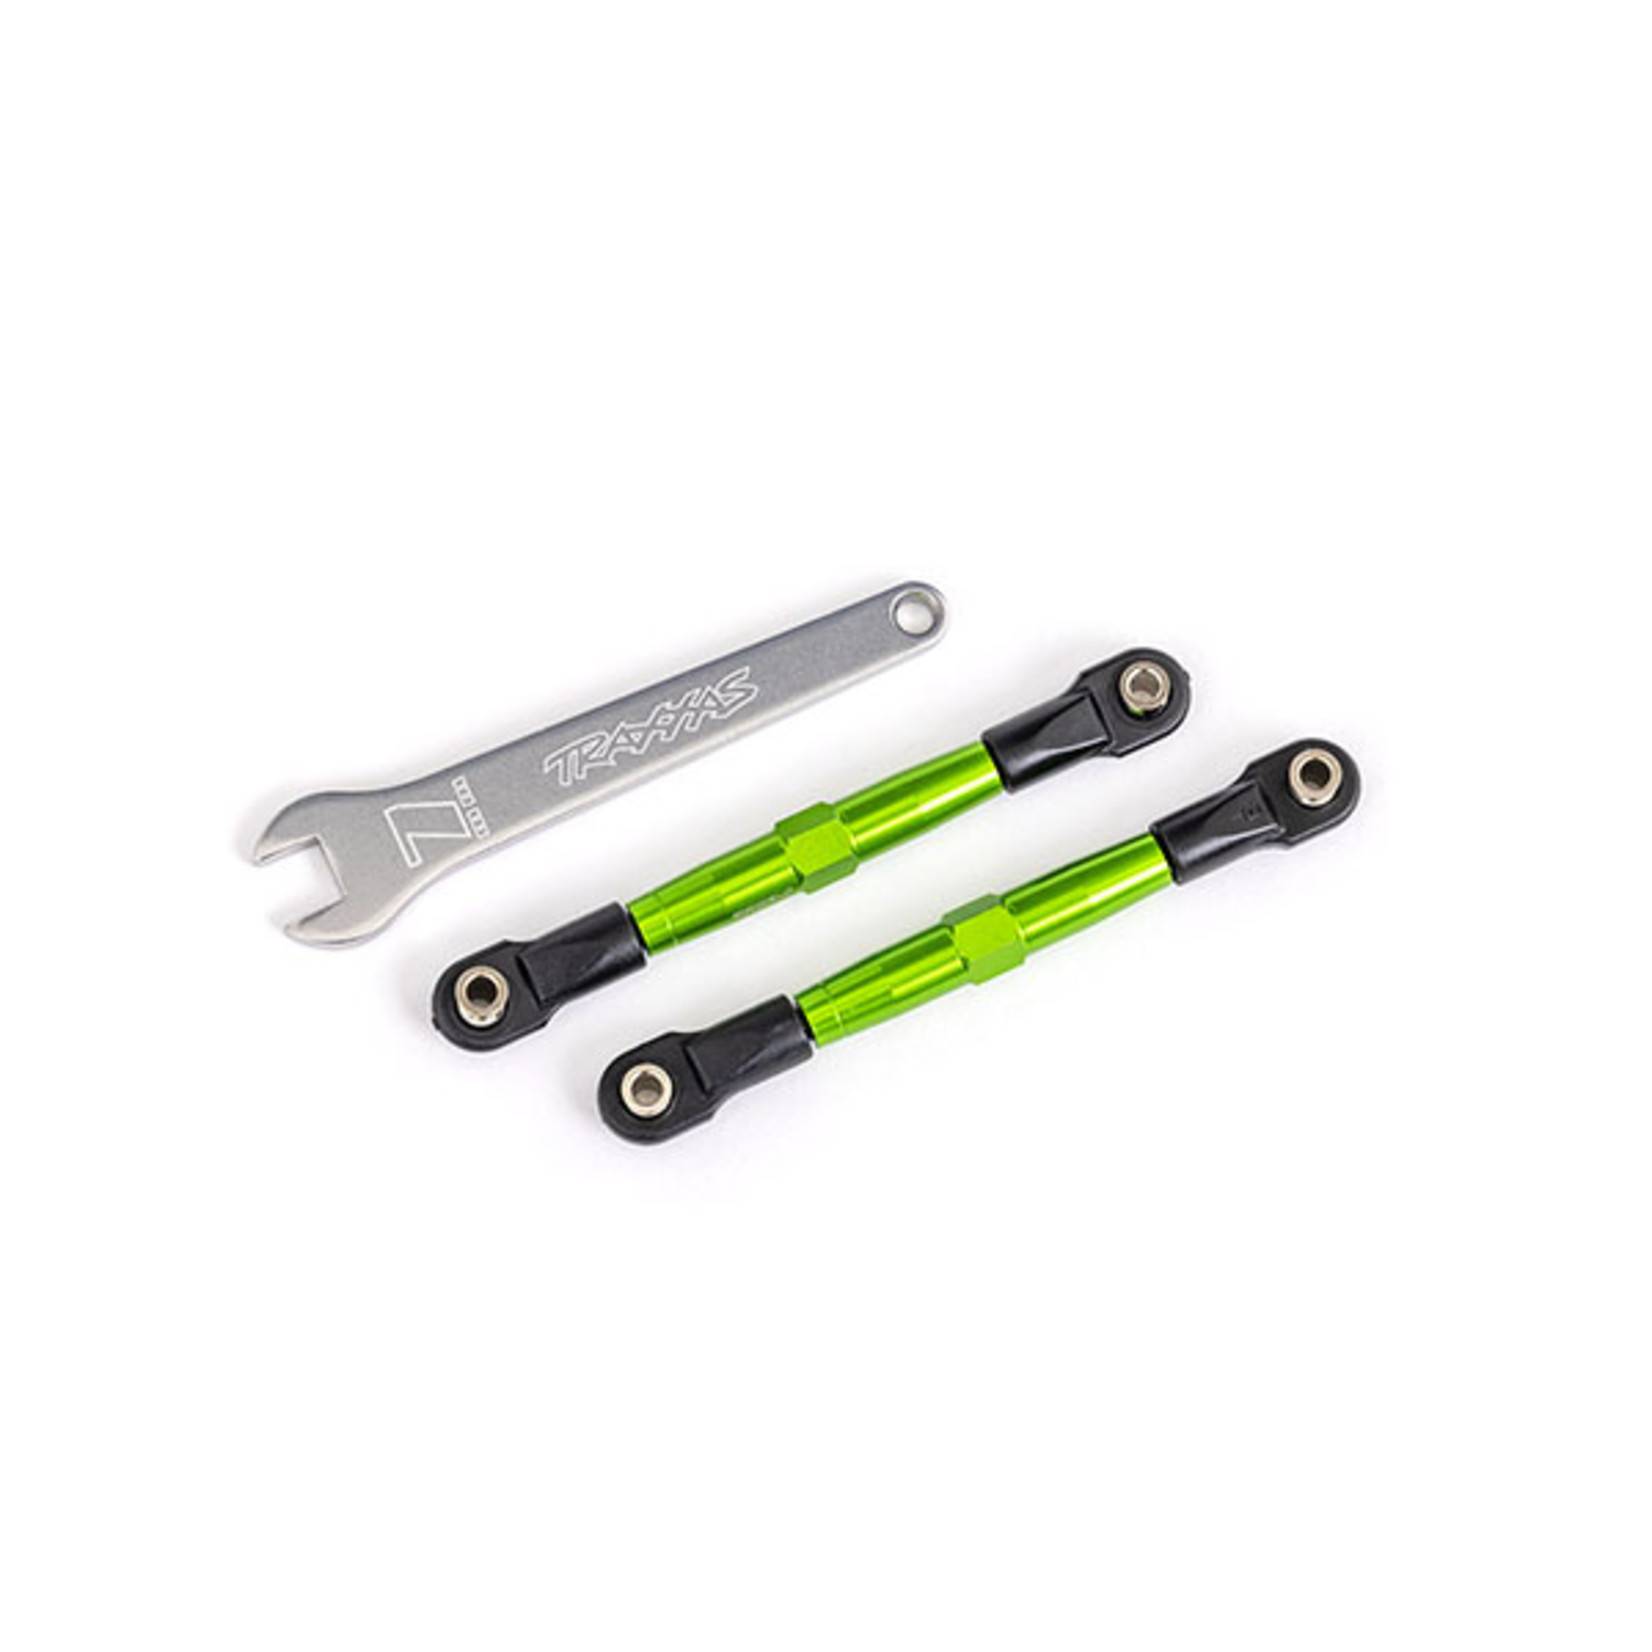 Traxxas 2445G - Toe links, front (TUBES green-anodized, 70